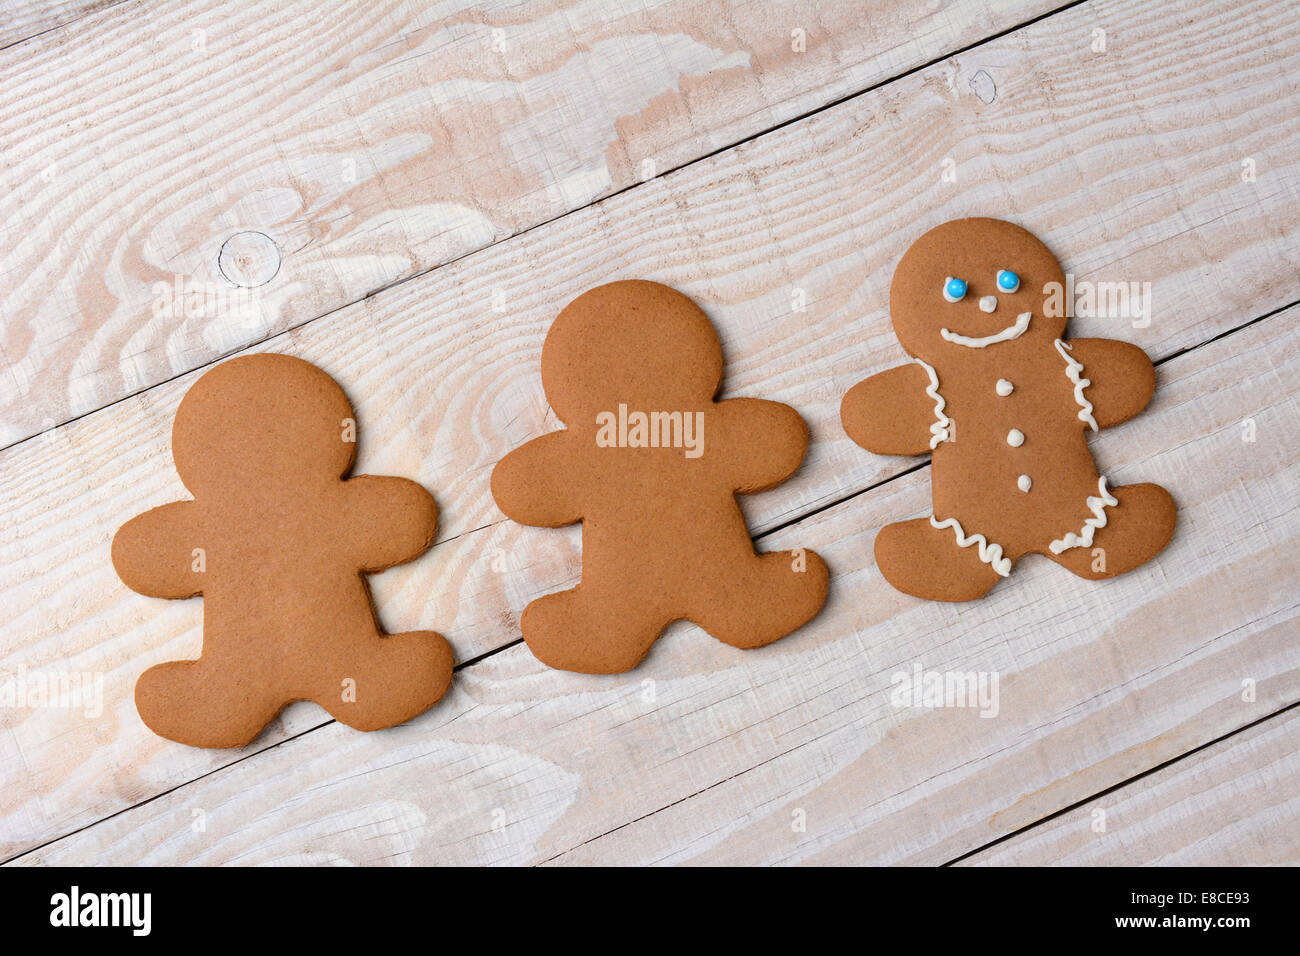 HIgh angle view of three gingerbread men on a rustic white kitchen table. Two cookies are  plain and without icing while one is Stock Photo